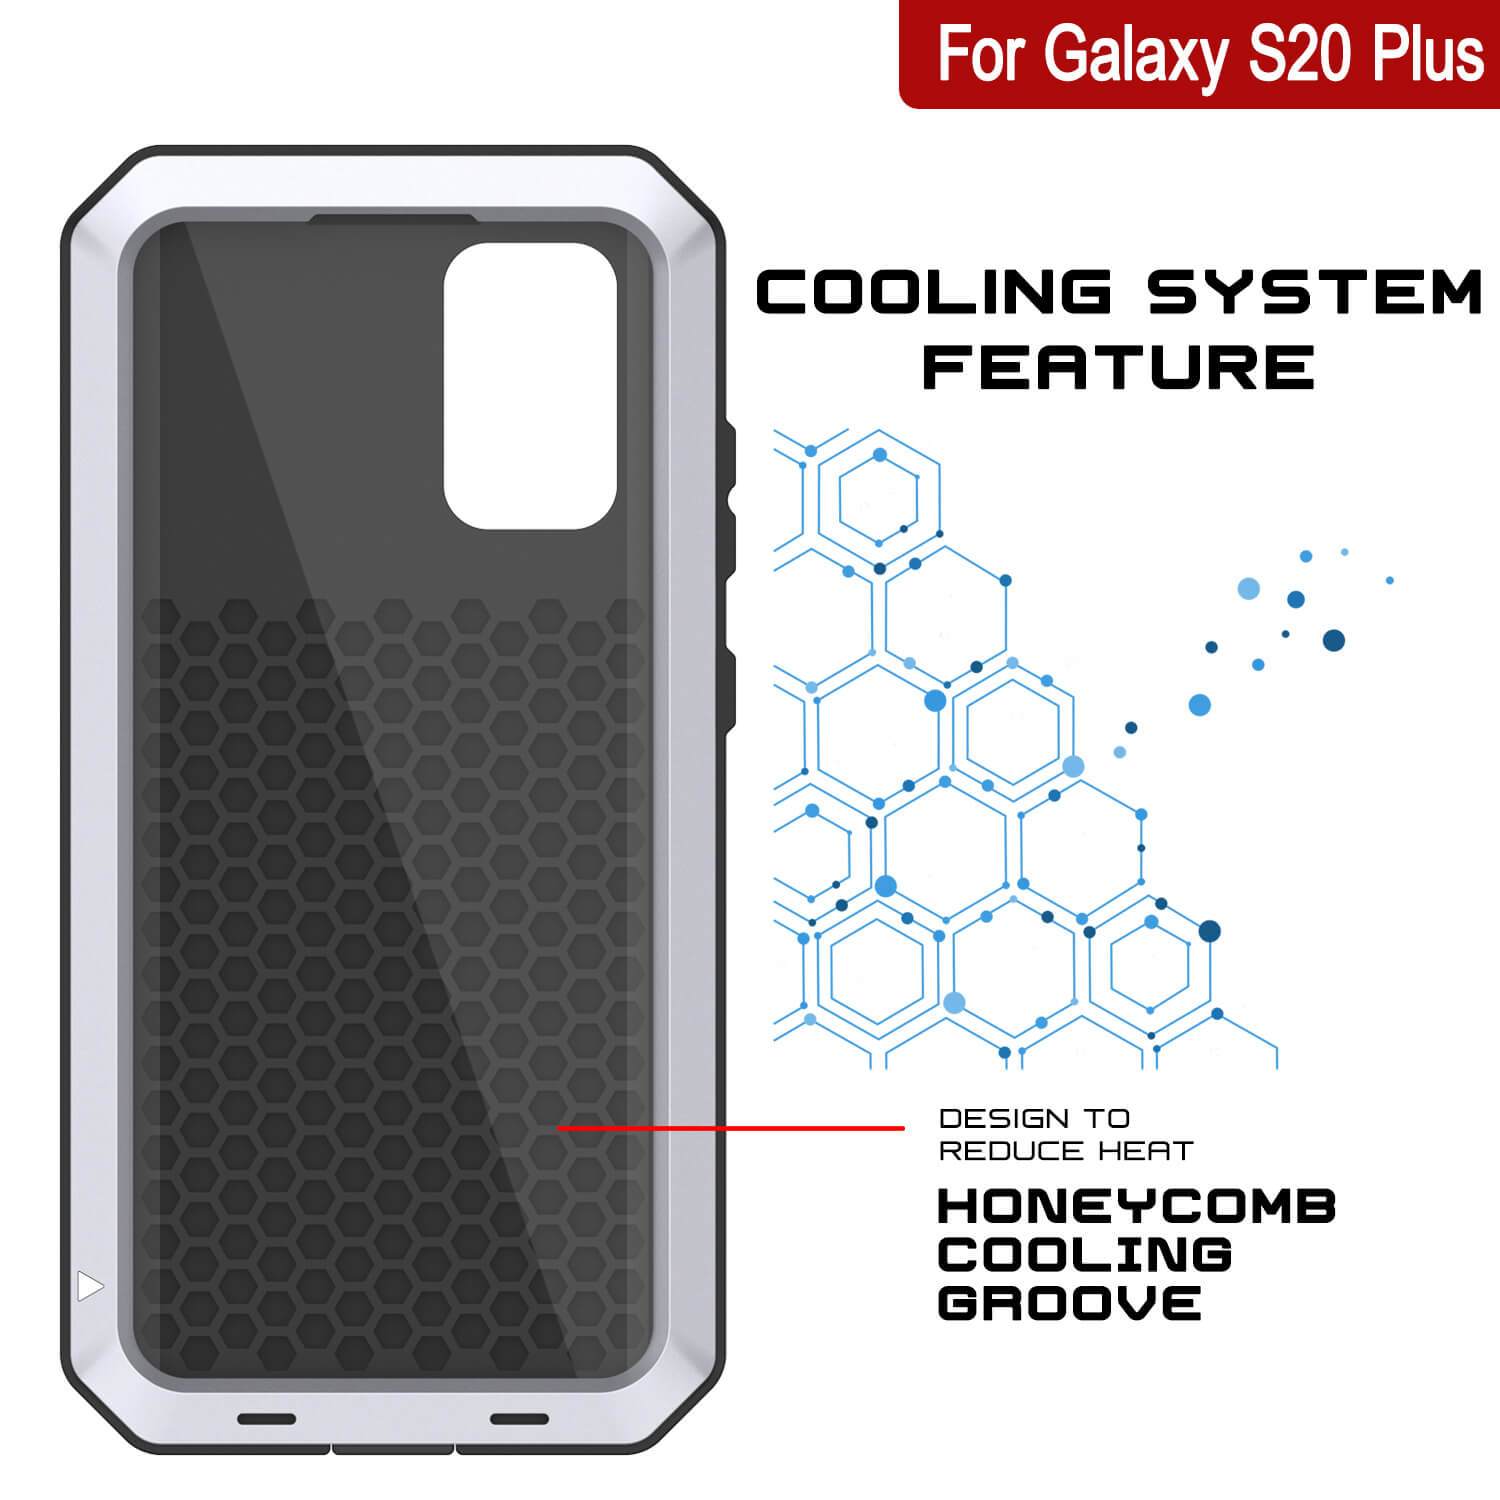 Galaxy s20+ Plus Metal Case, Heavy Duty Military Grade Rugged Armor Cover [White]